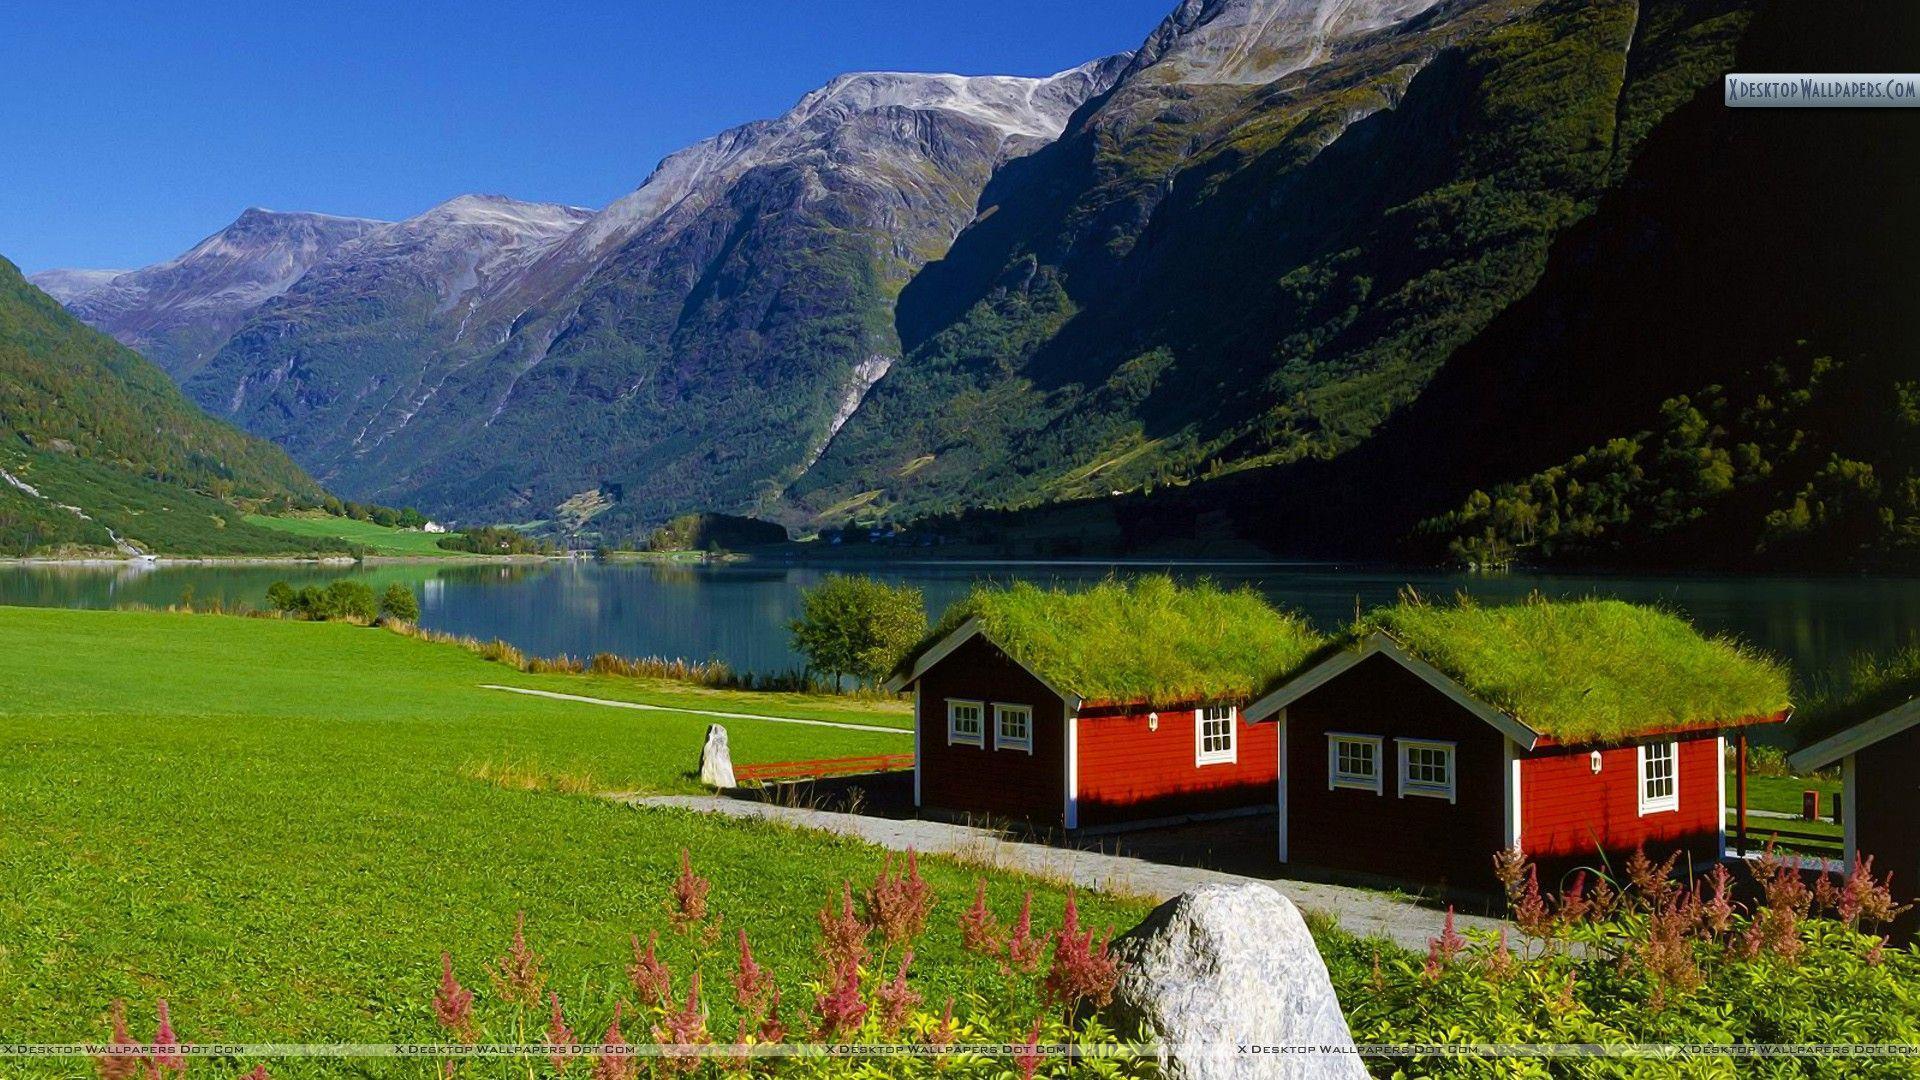 Norway Wallpaper, 31 Norway Photo and Picture, RT48 HDQ Wallpaper